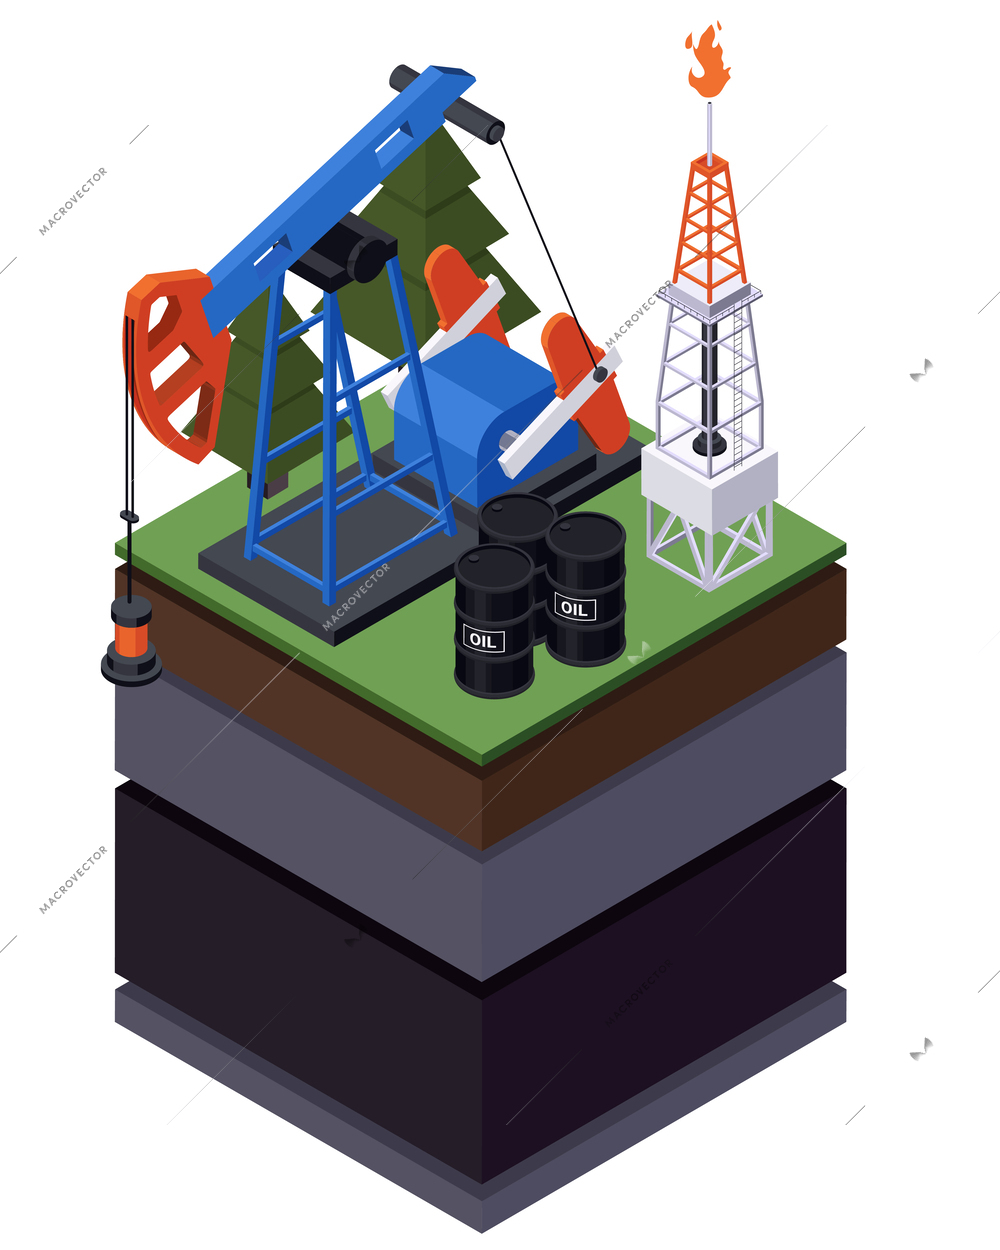 Earth sciences geology petrology seismology volcanology isometric composition with isolated view of ground layers oil derrick vector illustration